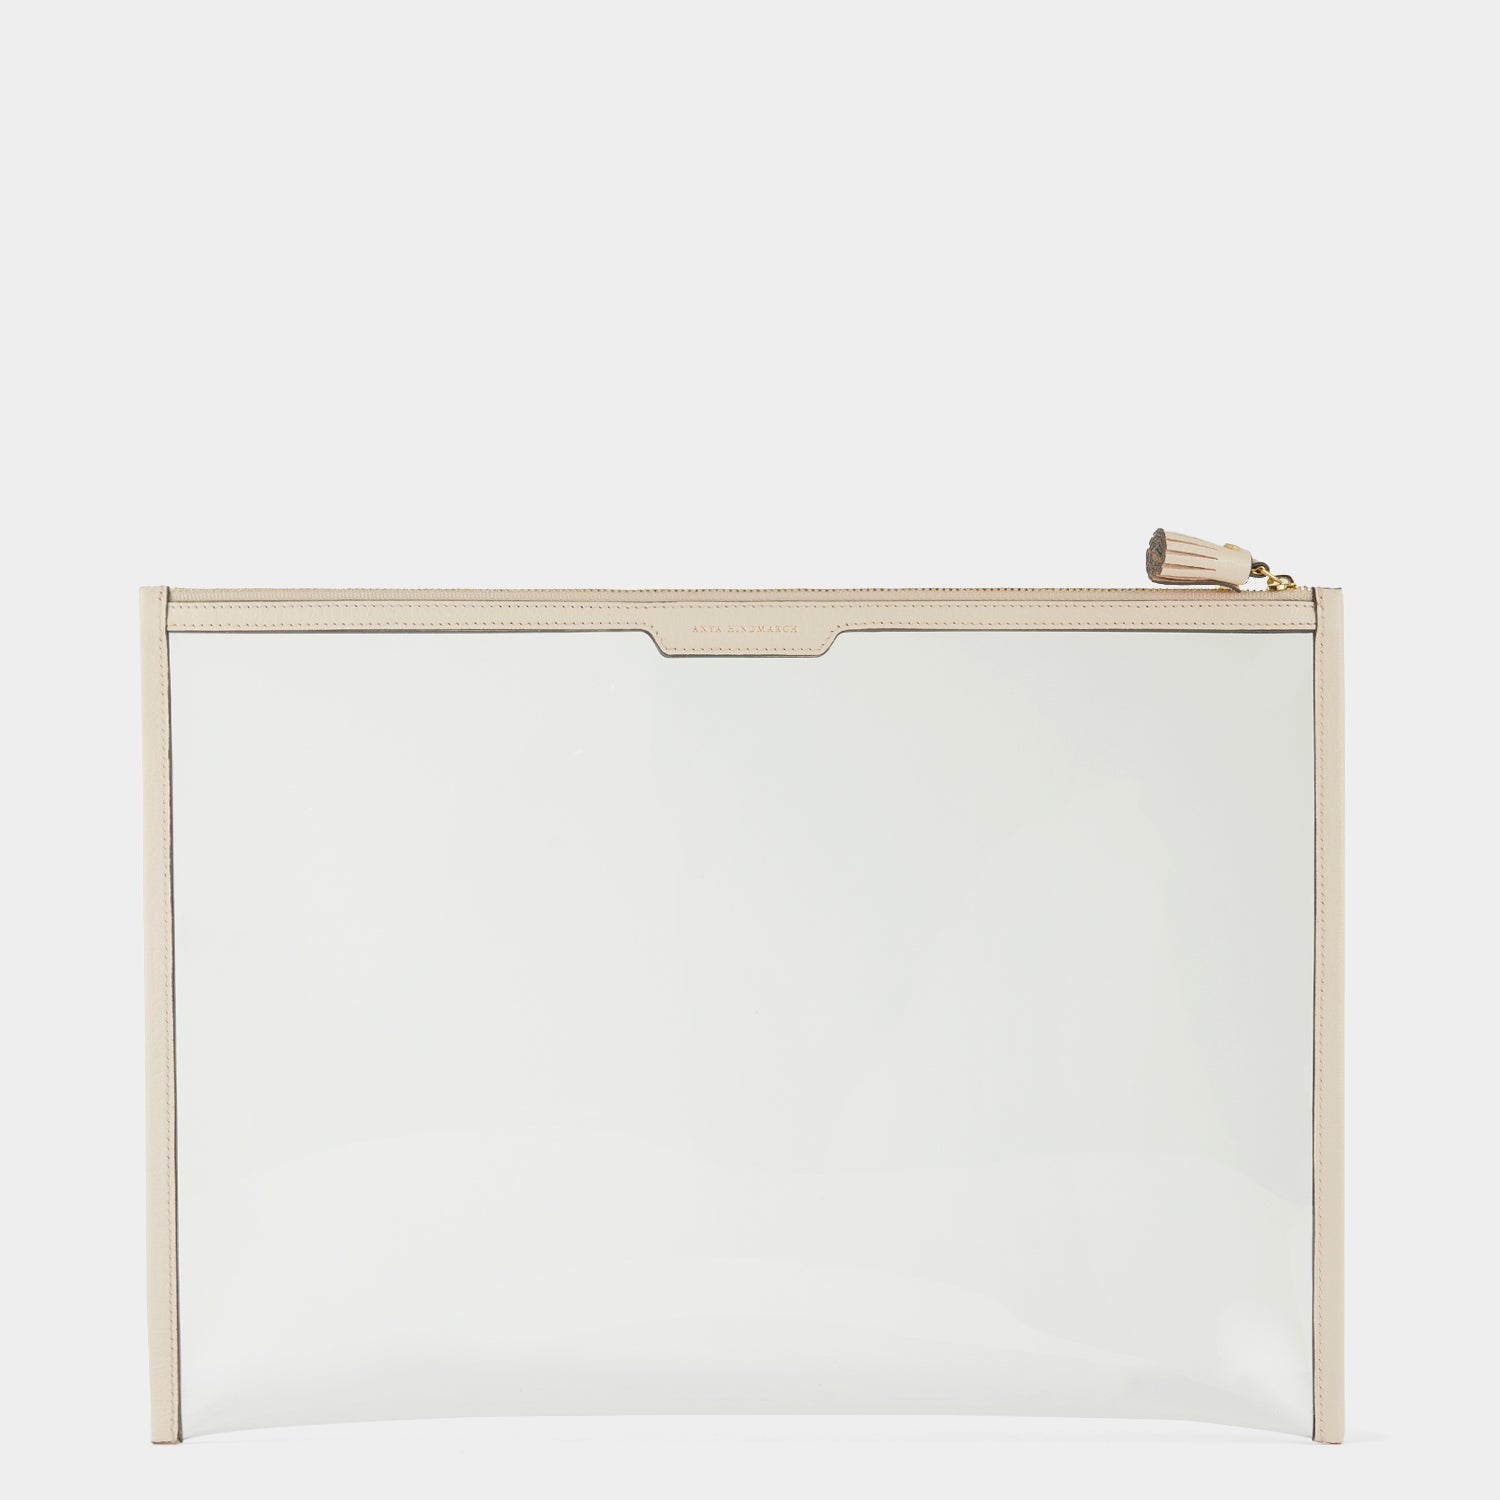 Papers Zip Sleeve -

                  
                    Capra Leather in Light Blush -
                  

                  Anya Hindmarch EU
